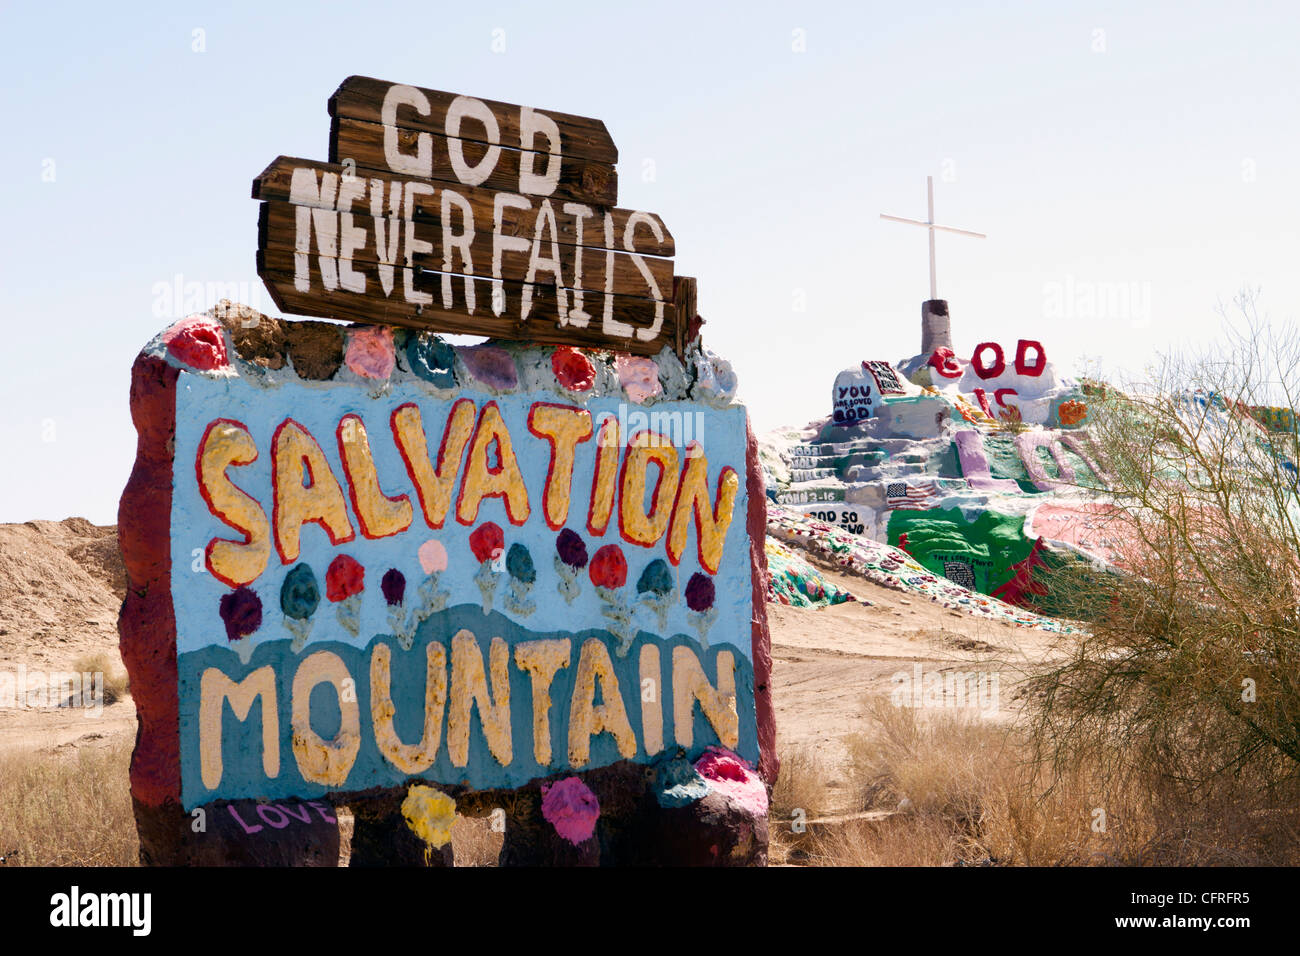 Salvation Mountain, a man-made structure in southeast California dedicated to Jesus. Stock Photo